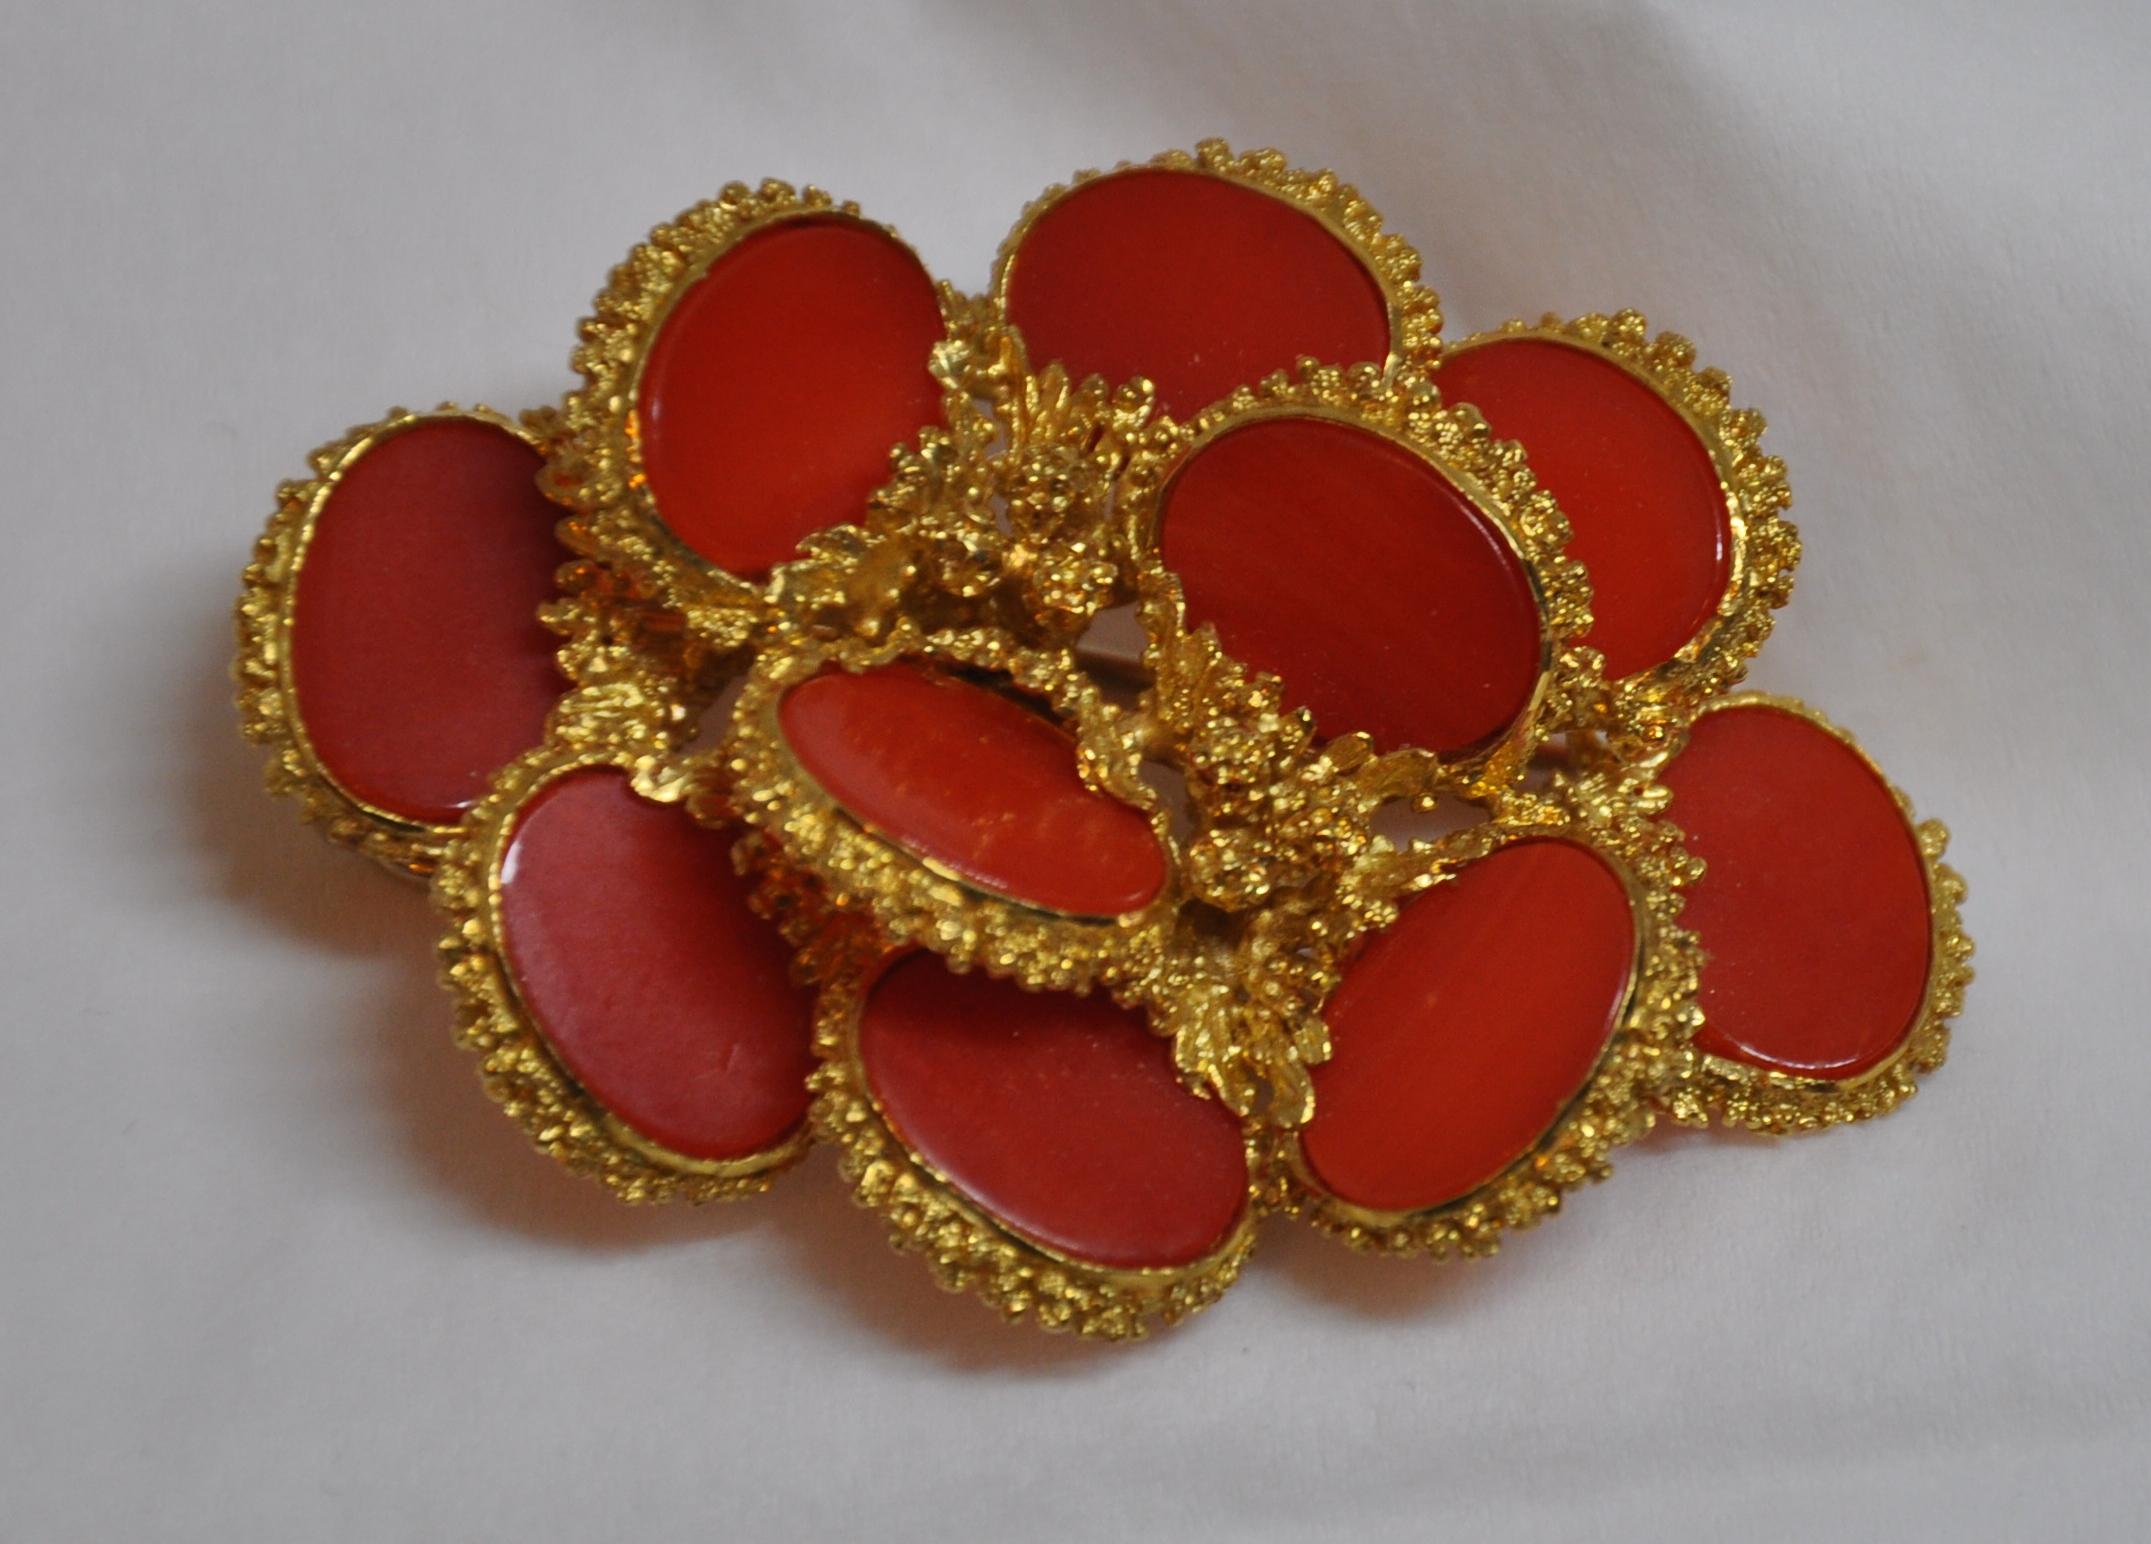        Wonderfully detailed etched 18k gilded yellow gold brooch and optional hat pin is accented with bursts of natural coral. The back is detailed with a safety pin to help secure this wonderfully elegant brooch in place. The brooch measures 2